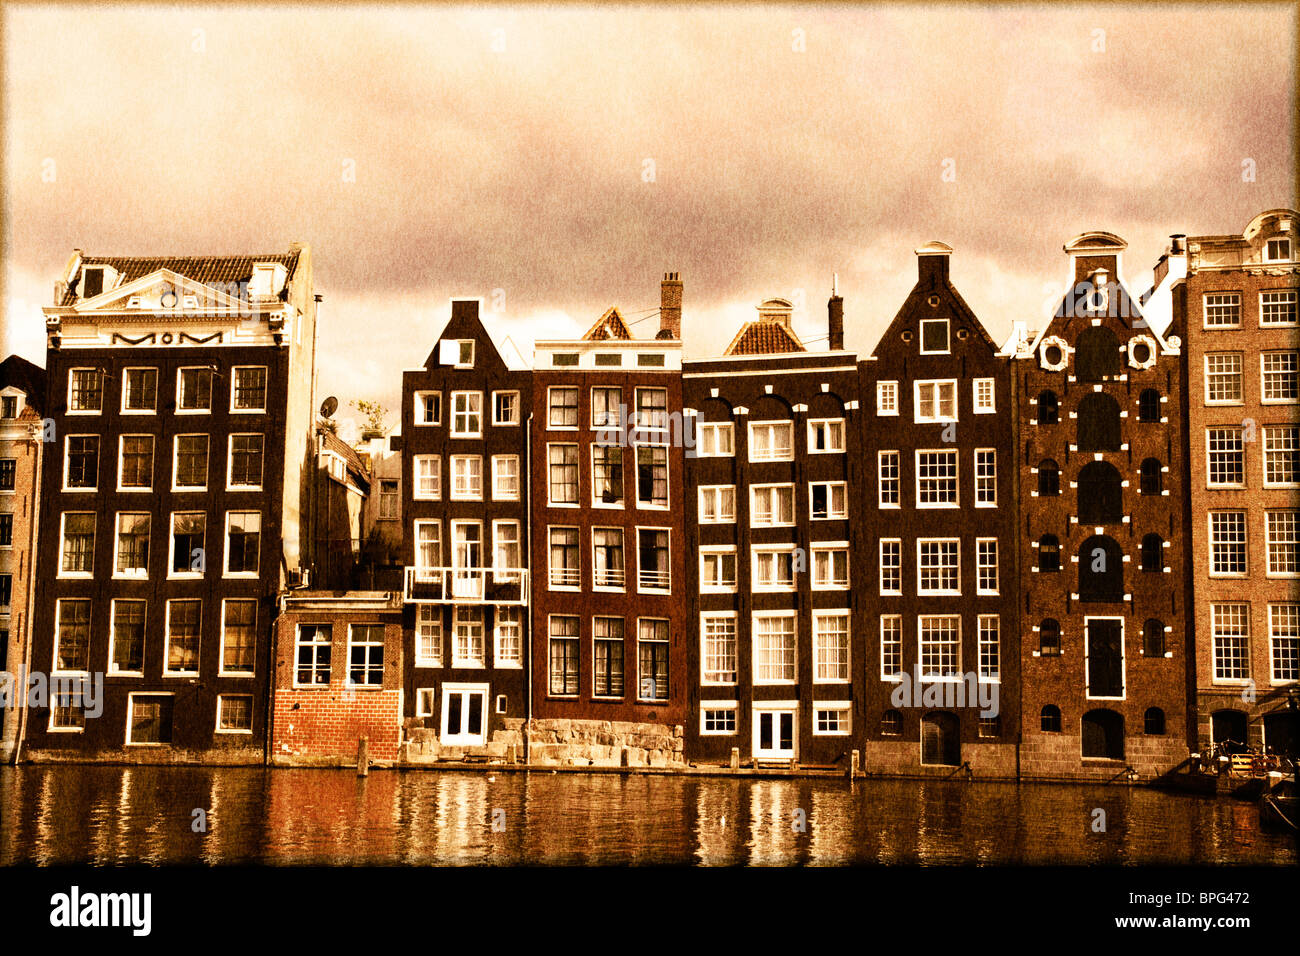 Amsterdam canal houses with a vintage sepia look Stock Photo